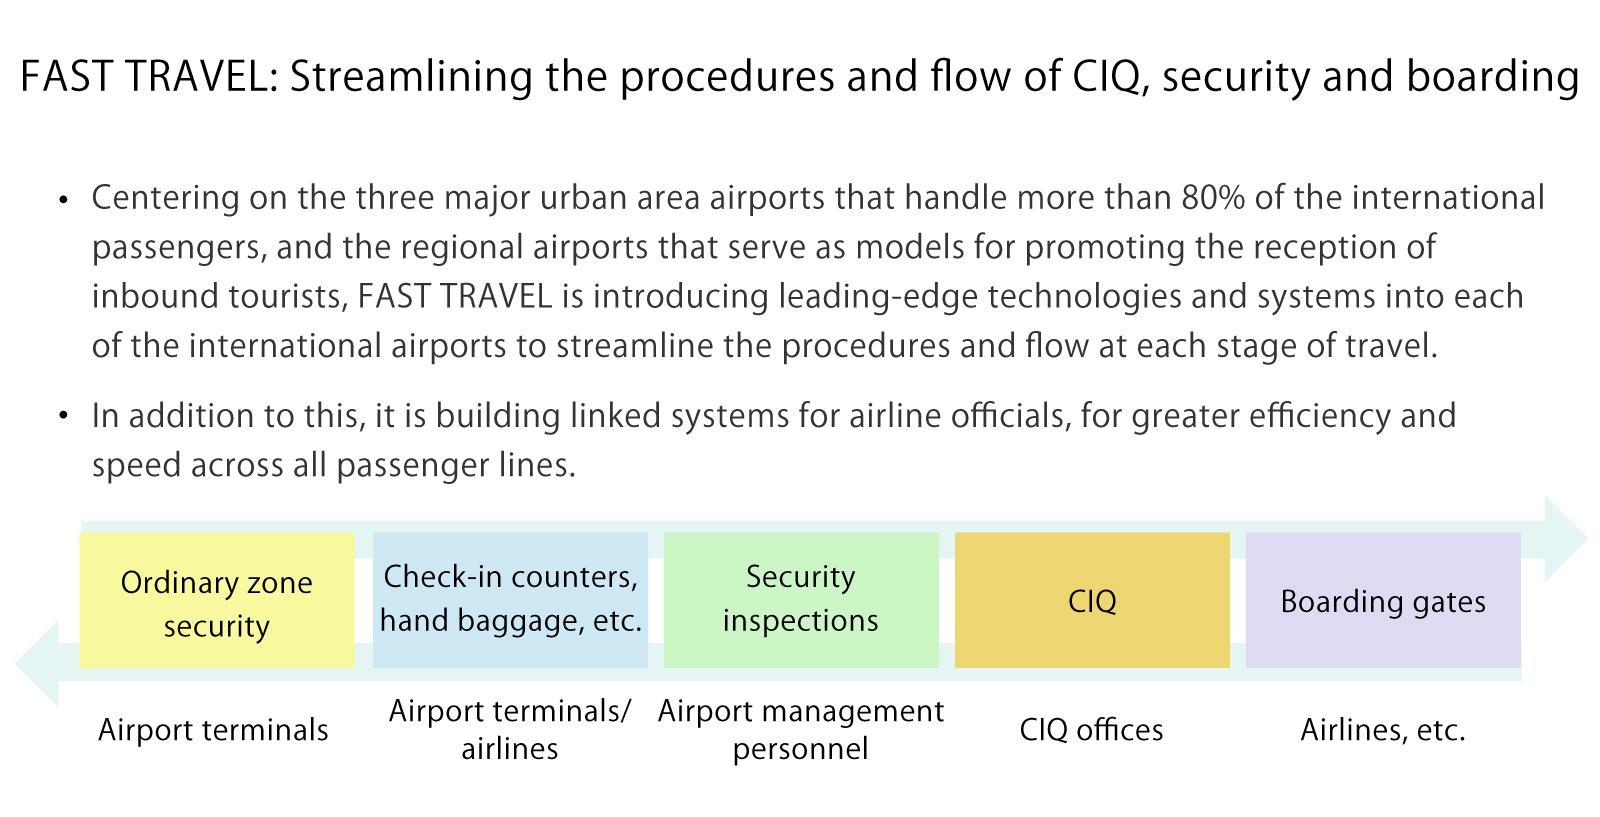 figure: FAST TRAVEL: Streamlining the procedures and flow of CIQ, security and boarding